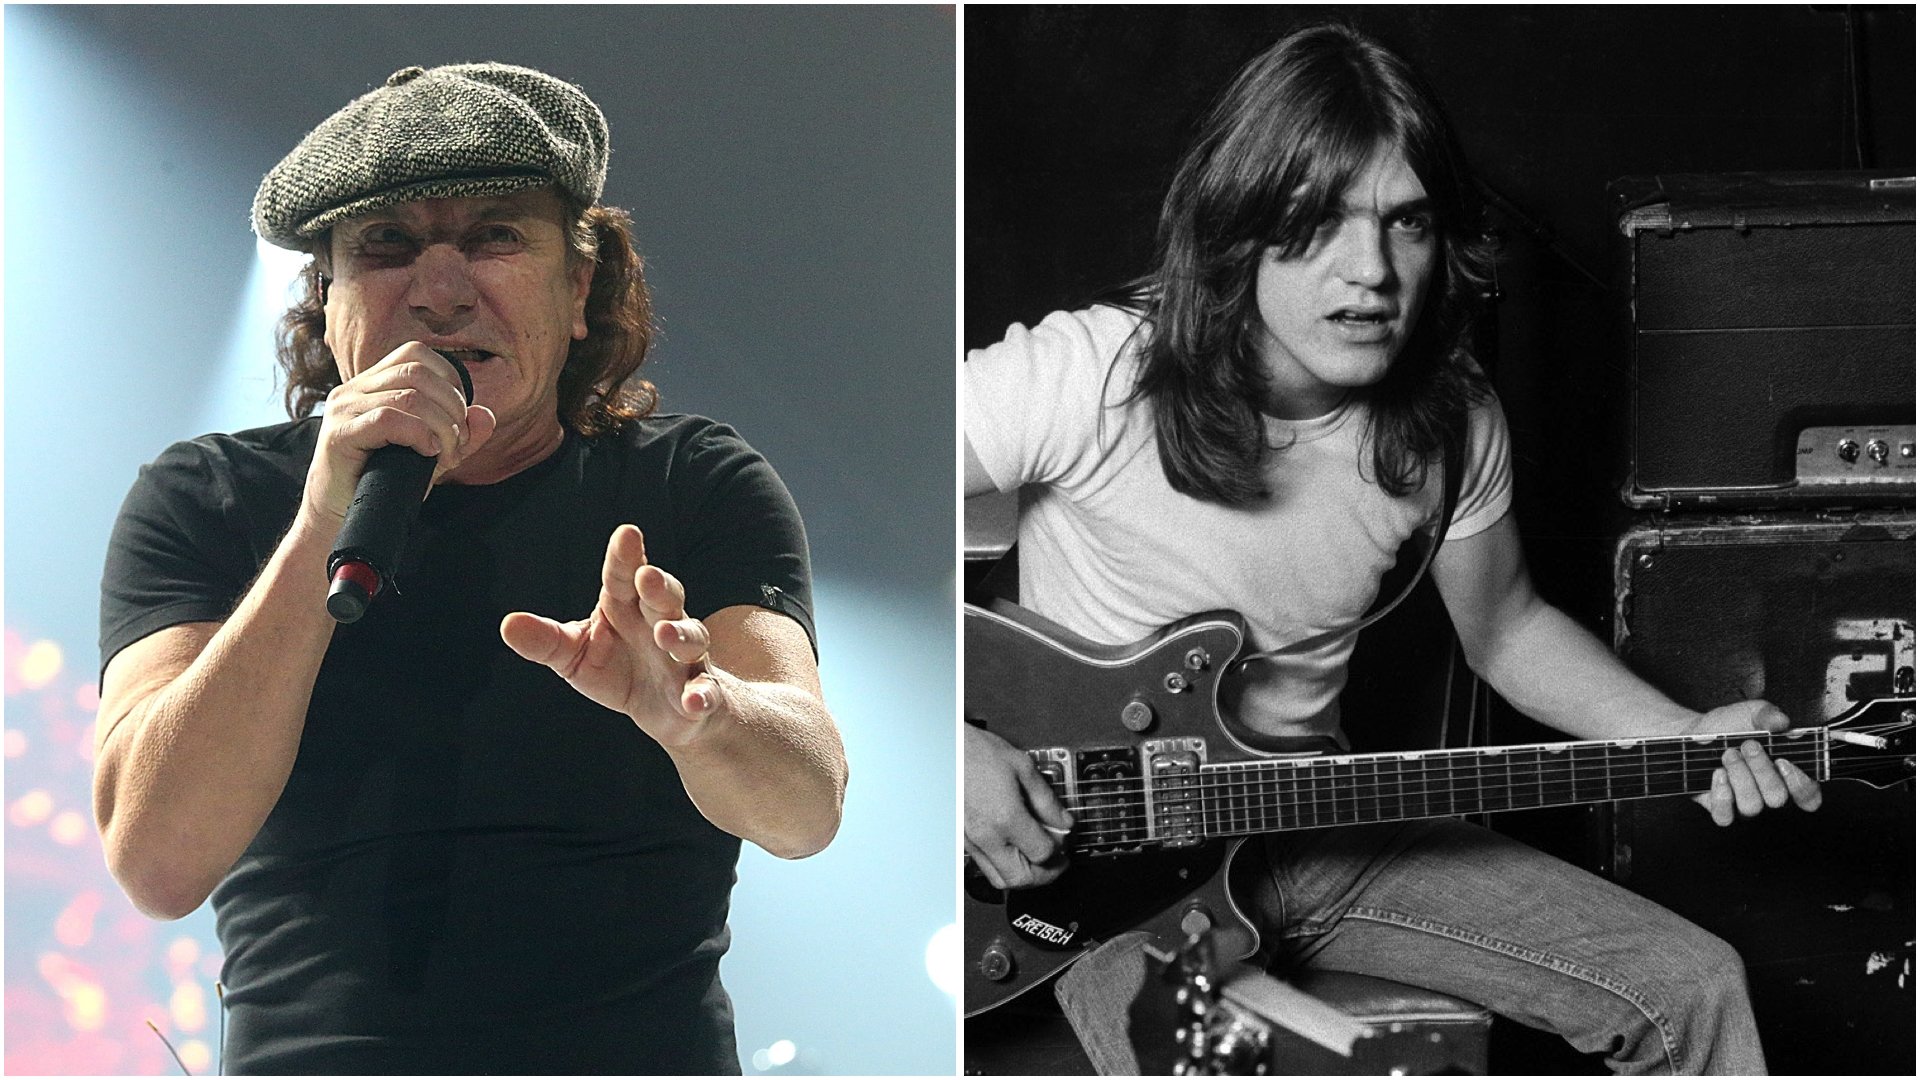 AC/DC Singer Brian Johnson On Malcolm Young: "I Can't He's Gone" - Feeds